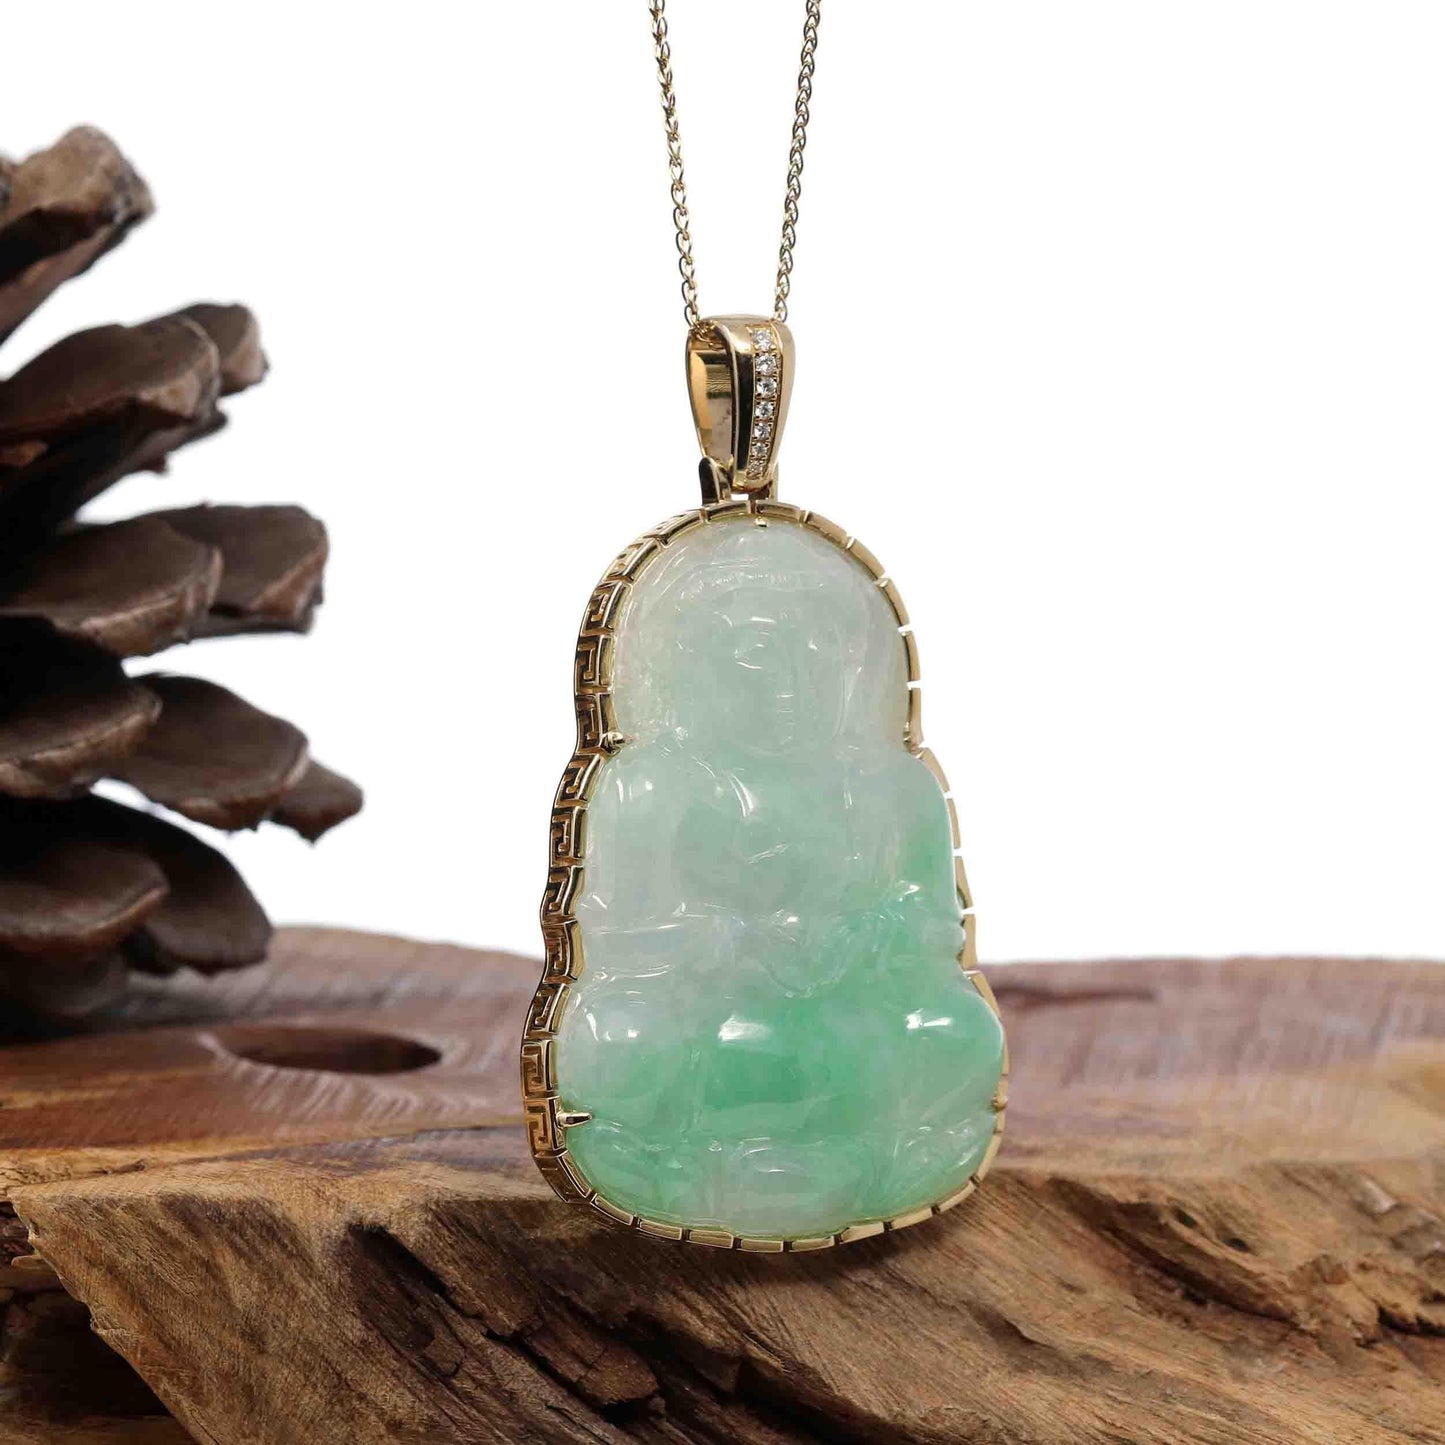 RealJade Co.® Jade Guanyin Pendant Necklace Copy of "Goddess of Compassion" 18k Yellow Gold Genuine Burmese Jadeite Jade Guanyin Necklace